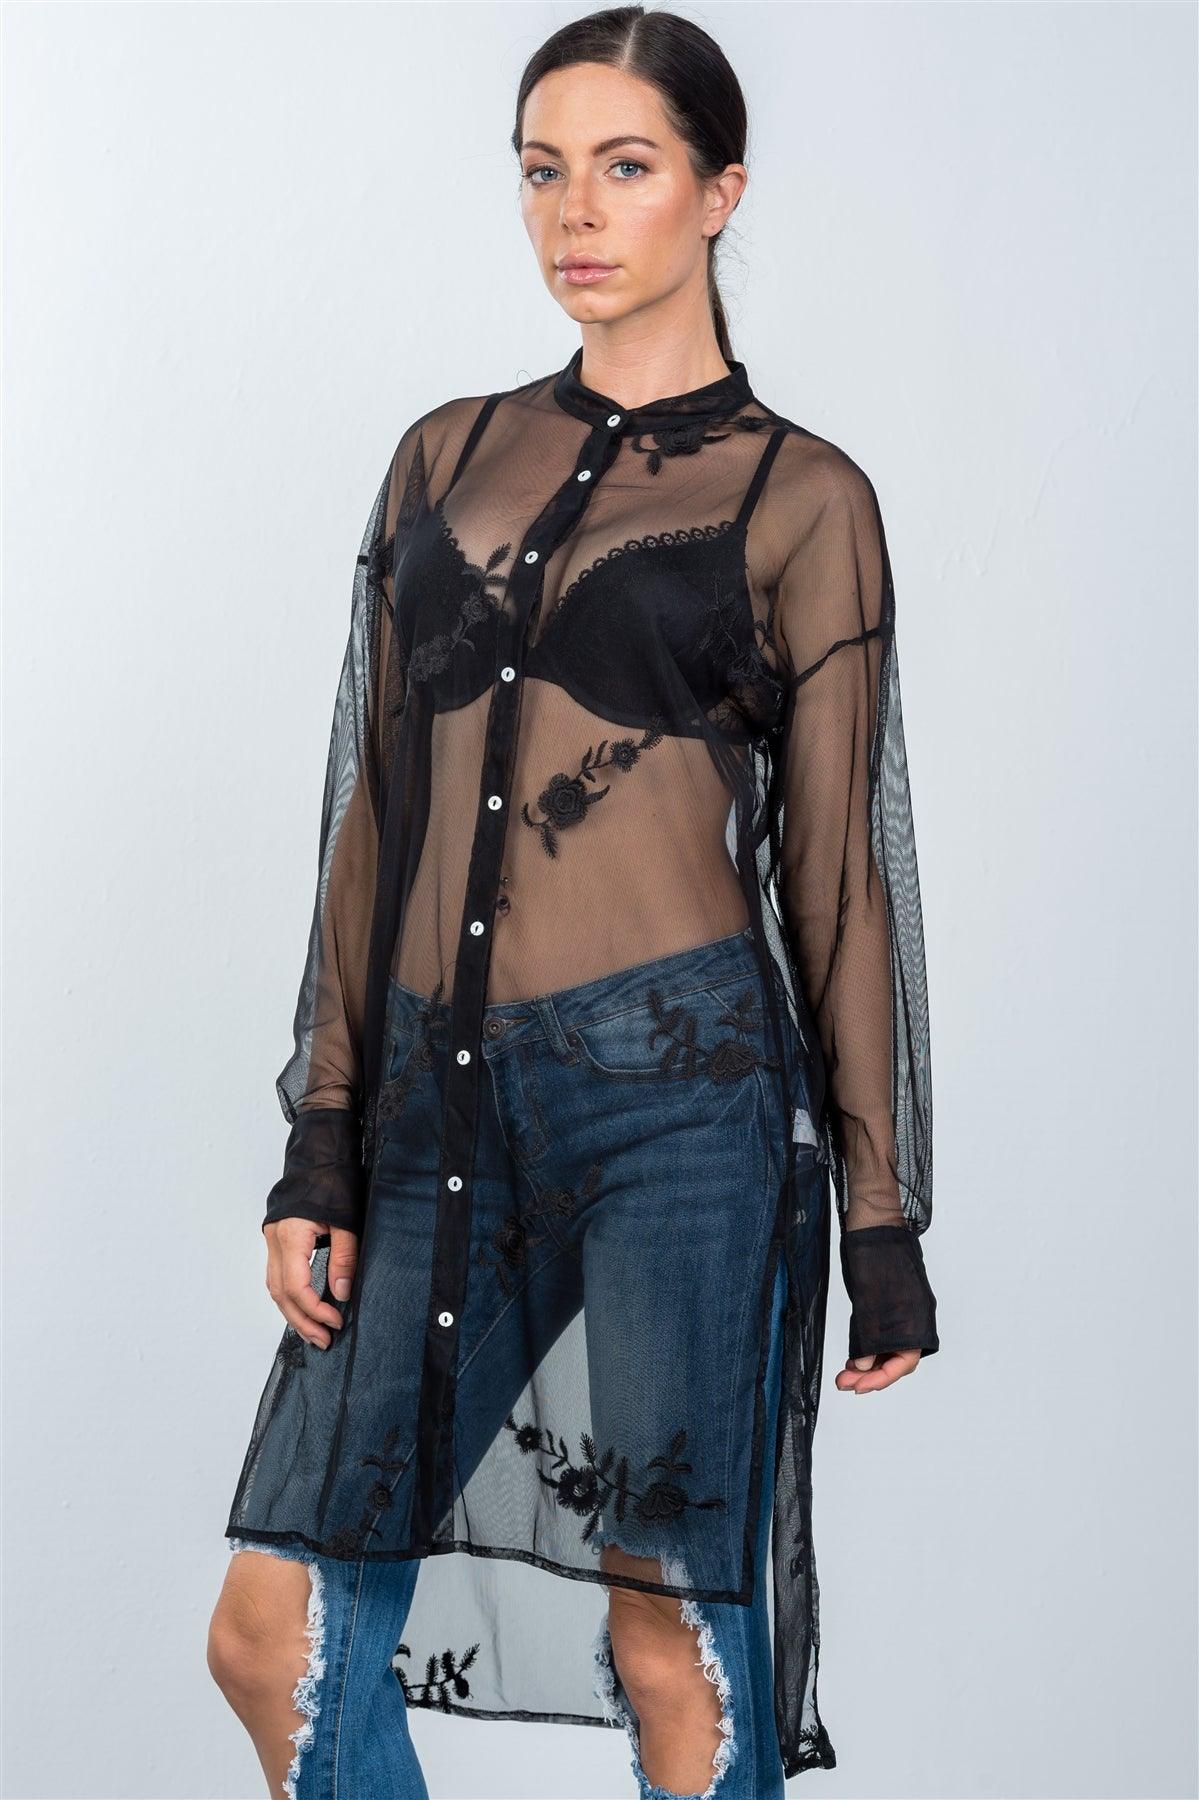 Black Mesh Sheer Floral Embroidered Button Down Boho Shirt /3-2-1